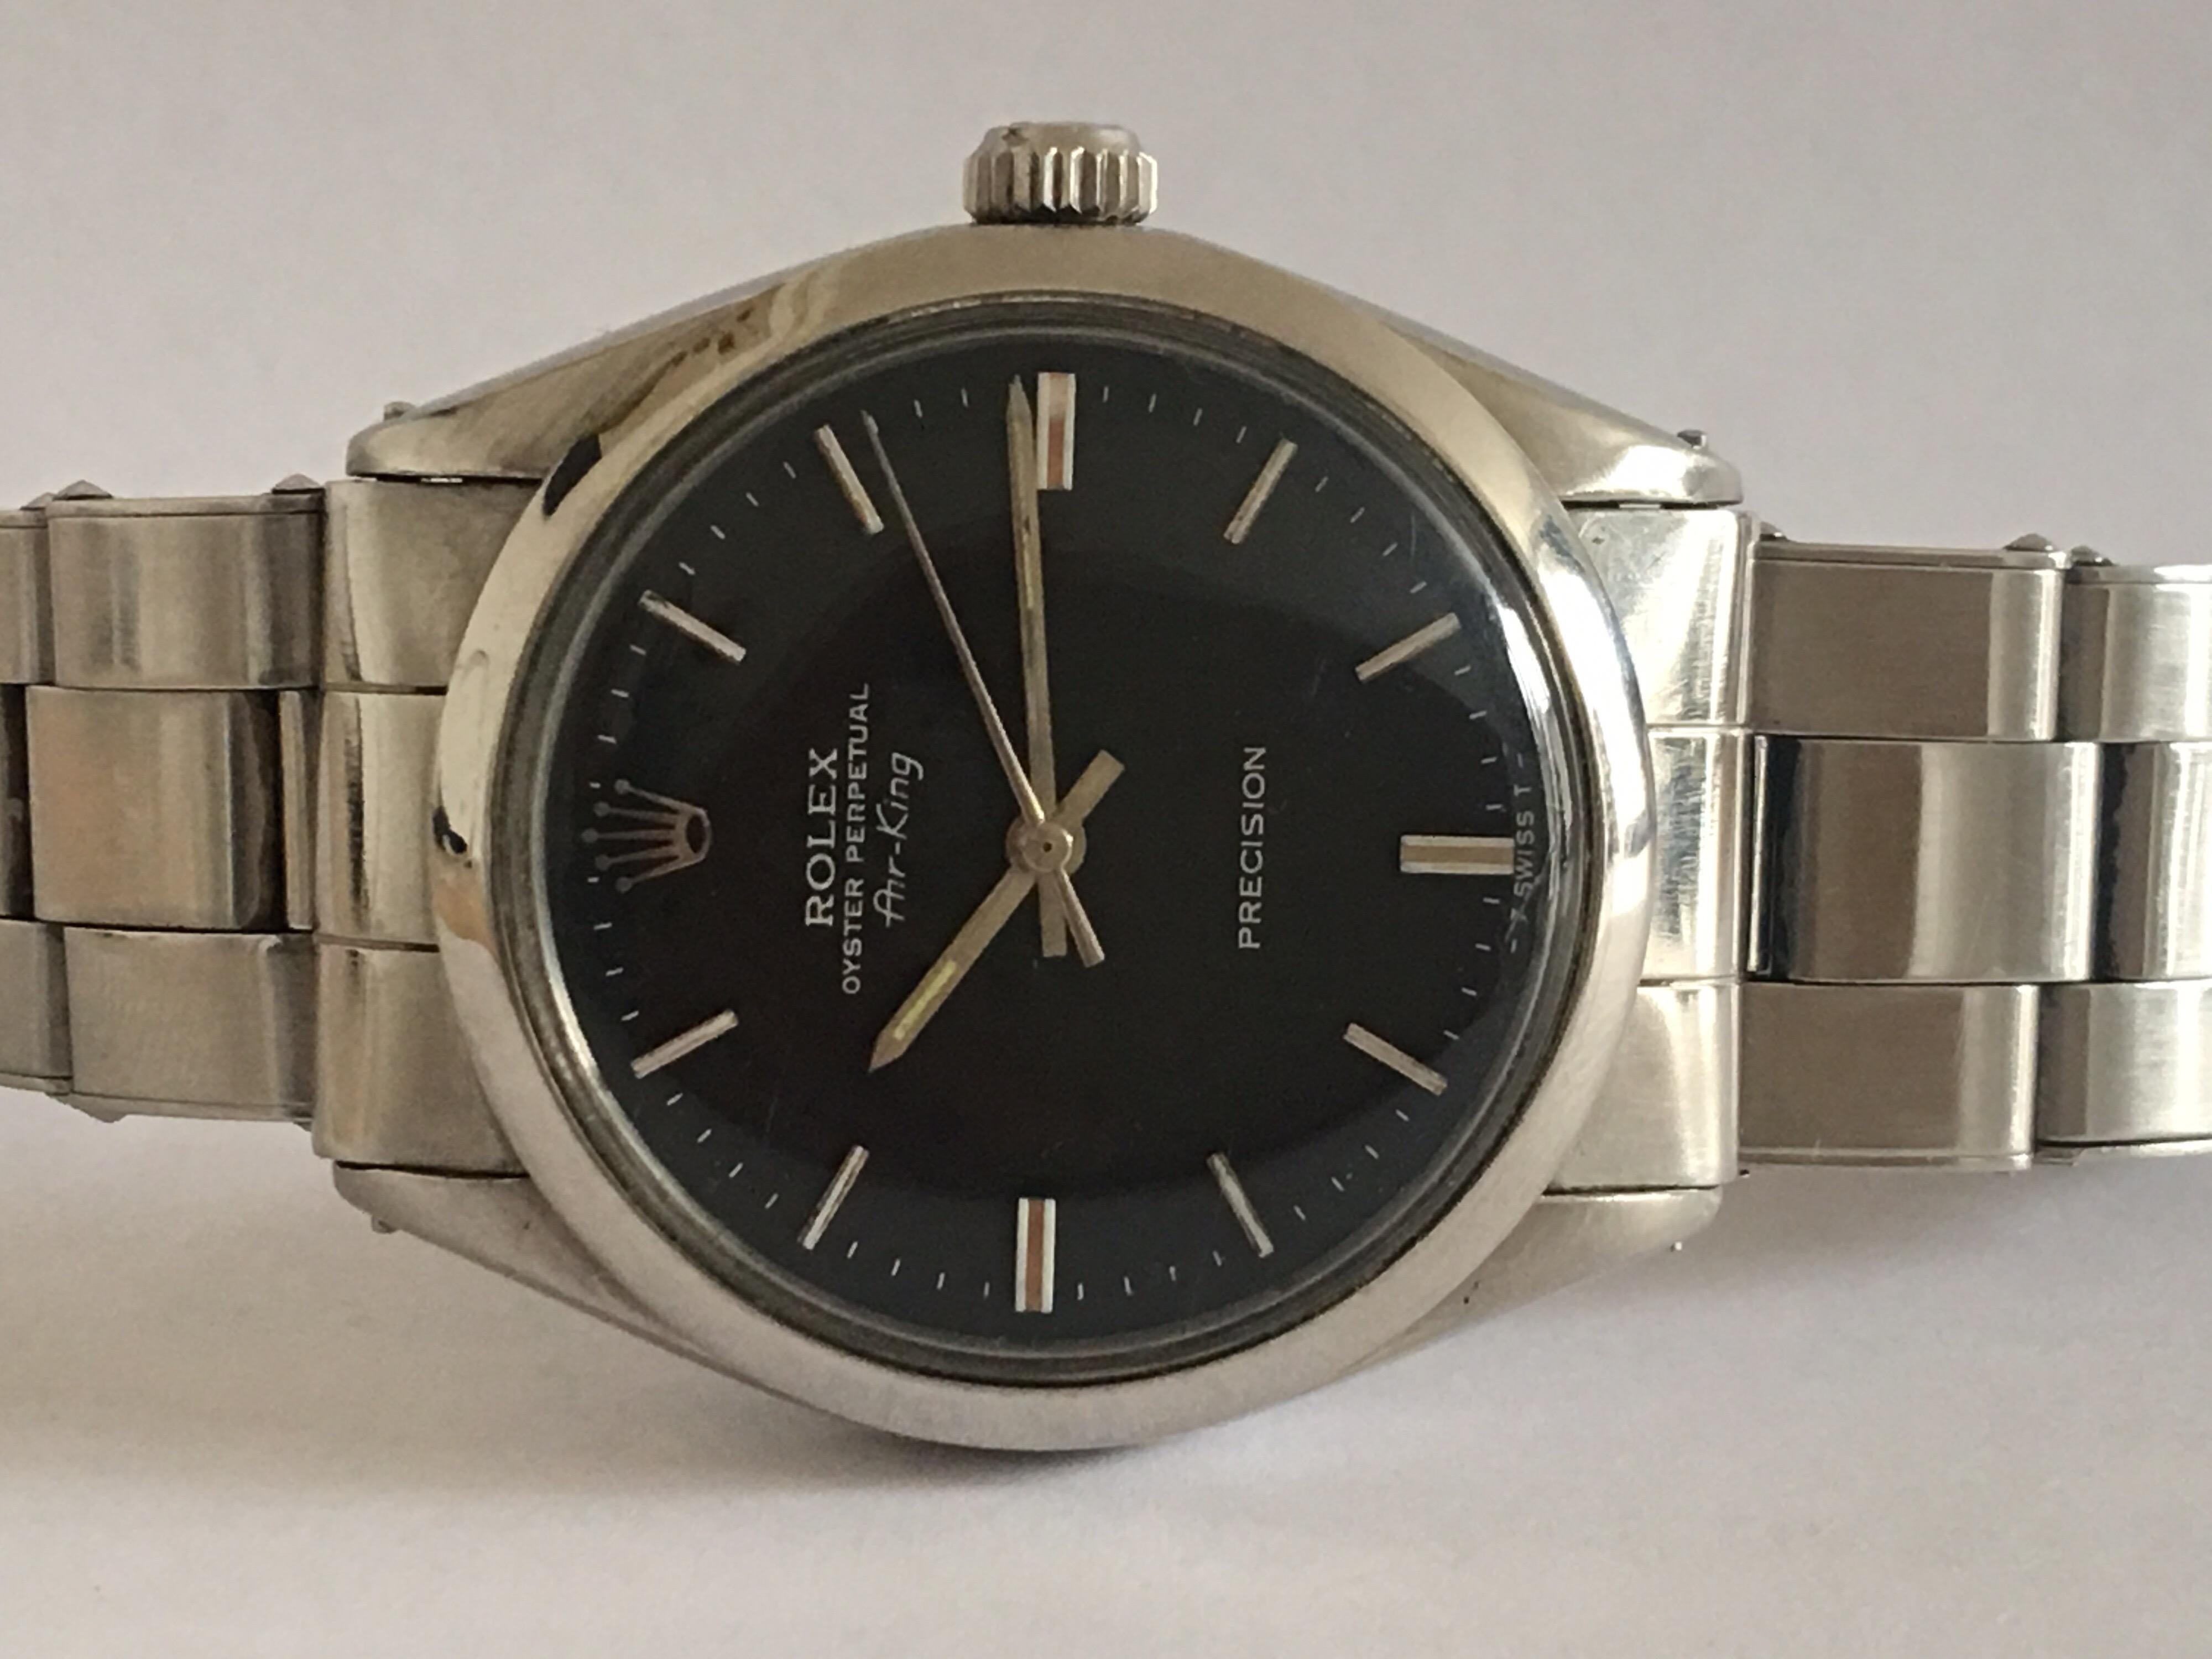 Vintage 1960s Rolex Oyster Perpetual Air-King Precision, 1520 In Good Condition For Sale In Carlisle, GB